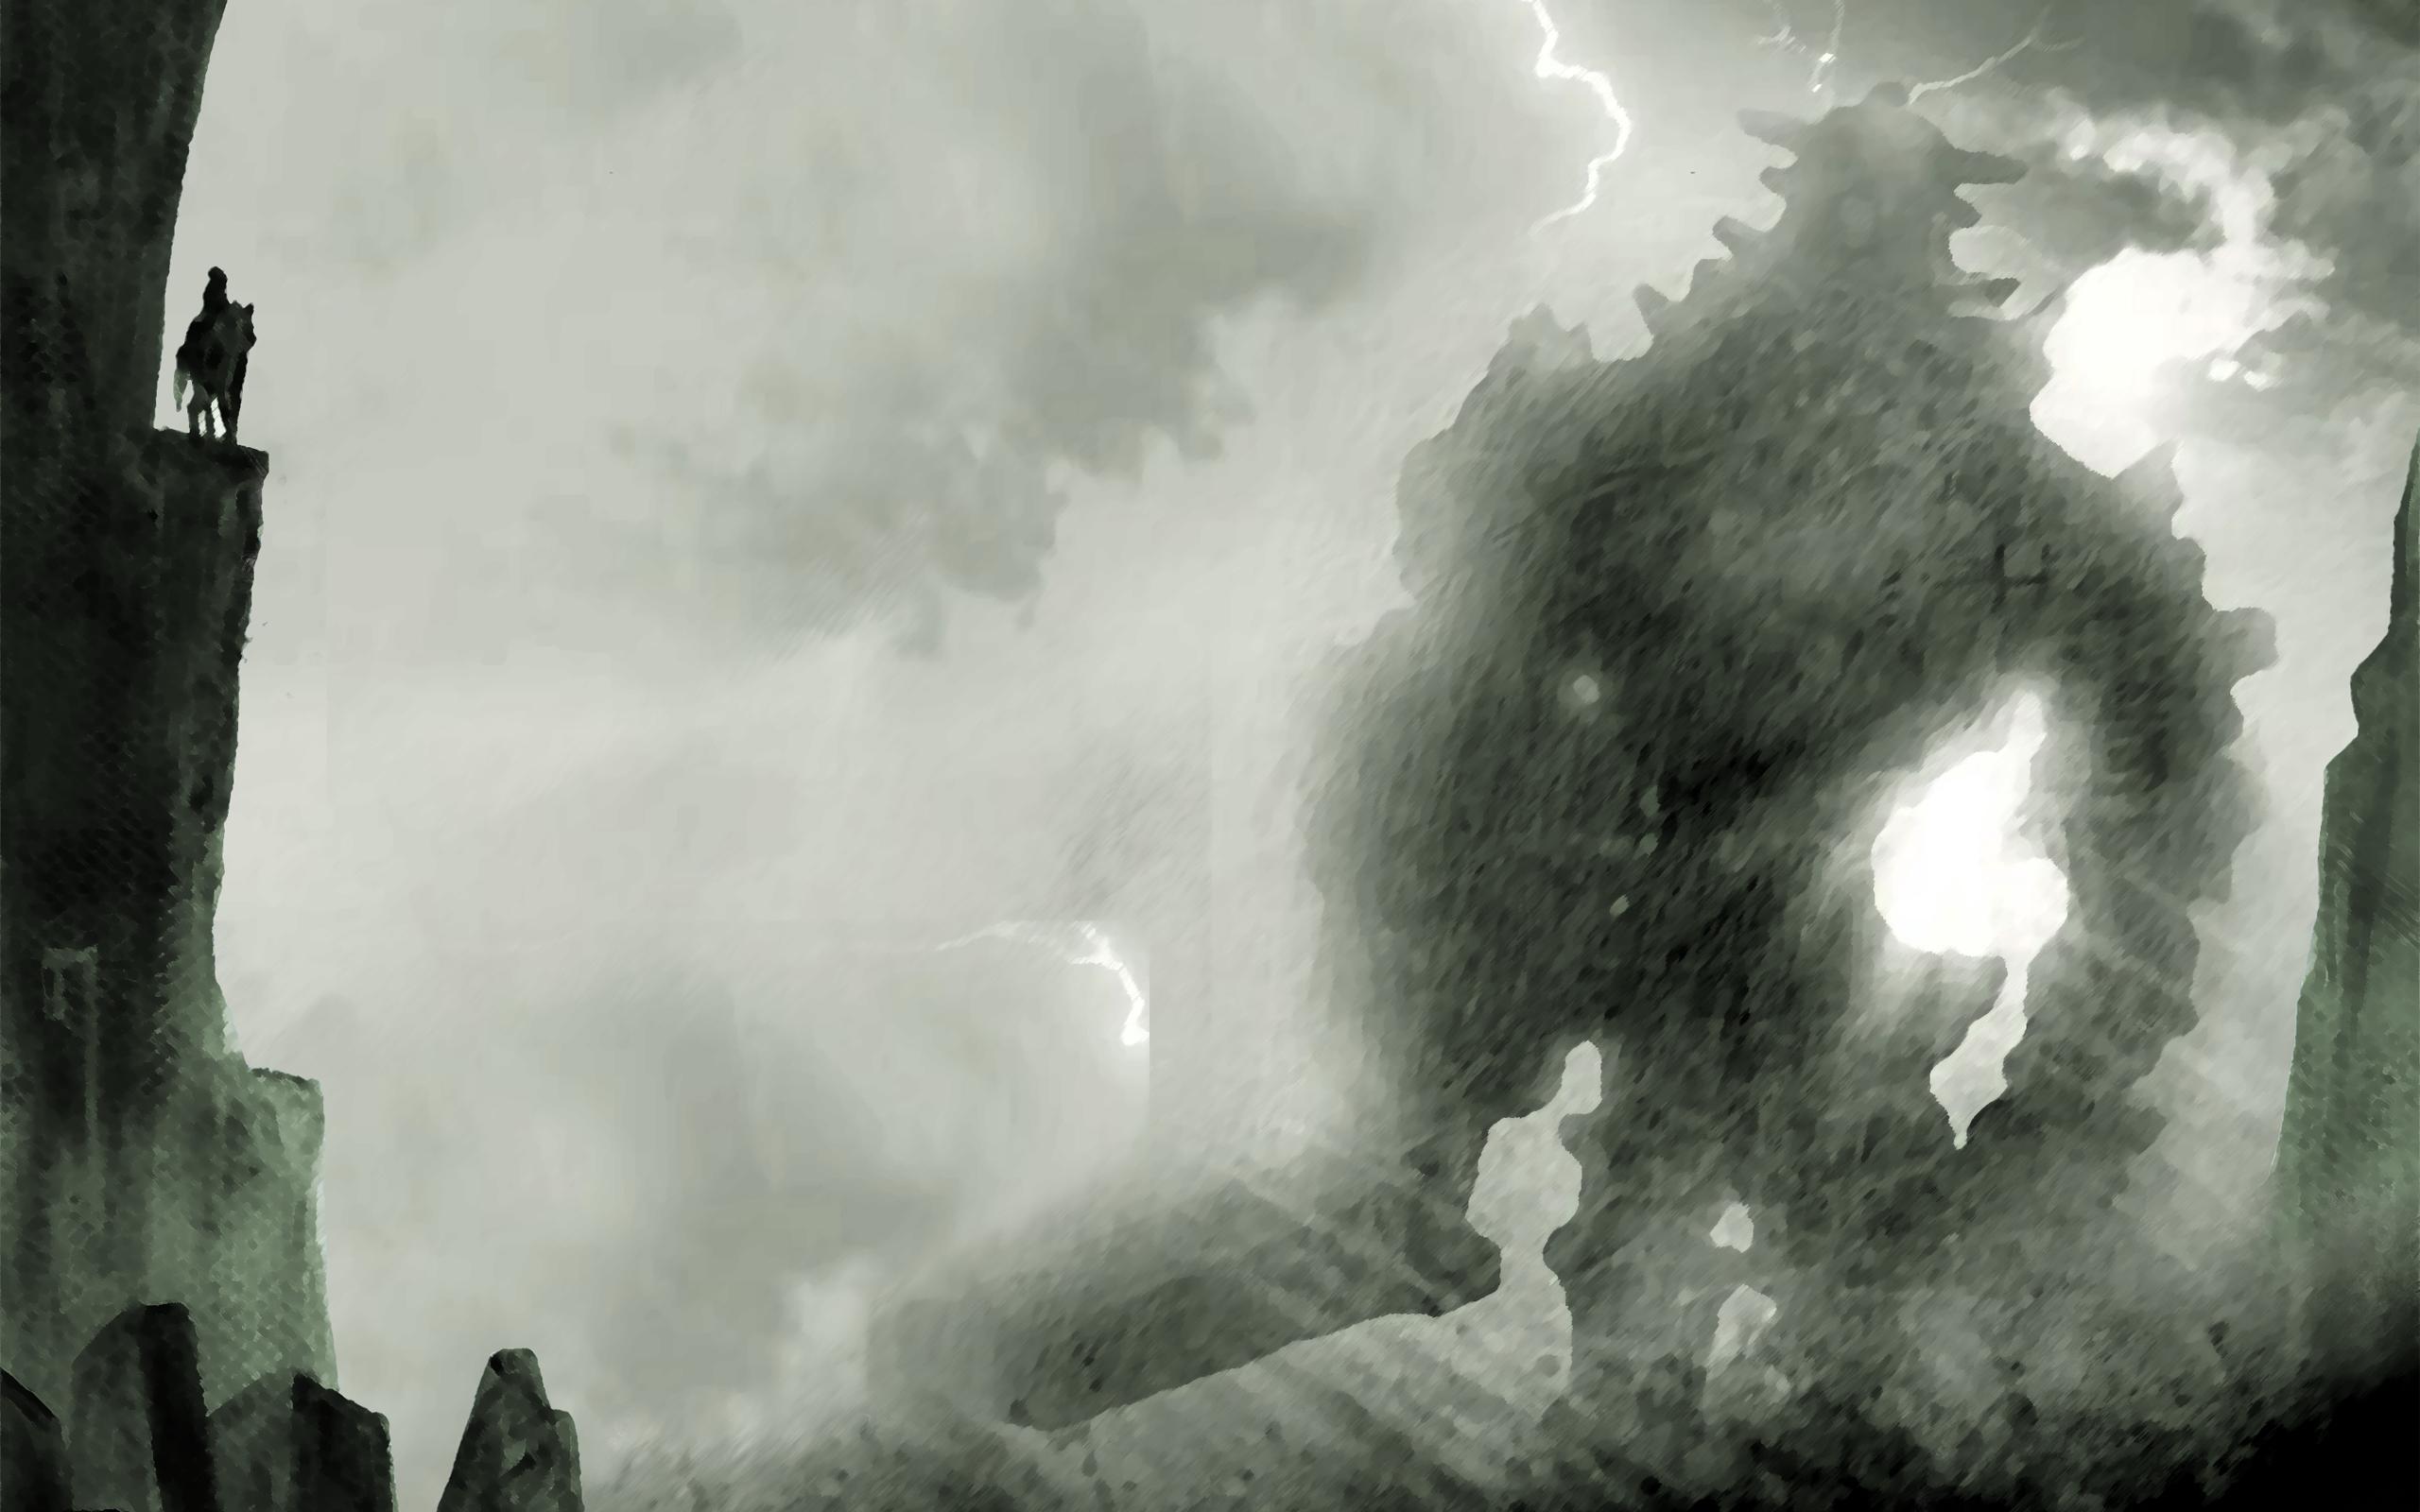 71 Shadow Of The Colossus HD Wallpapers